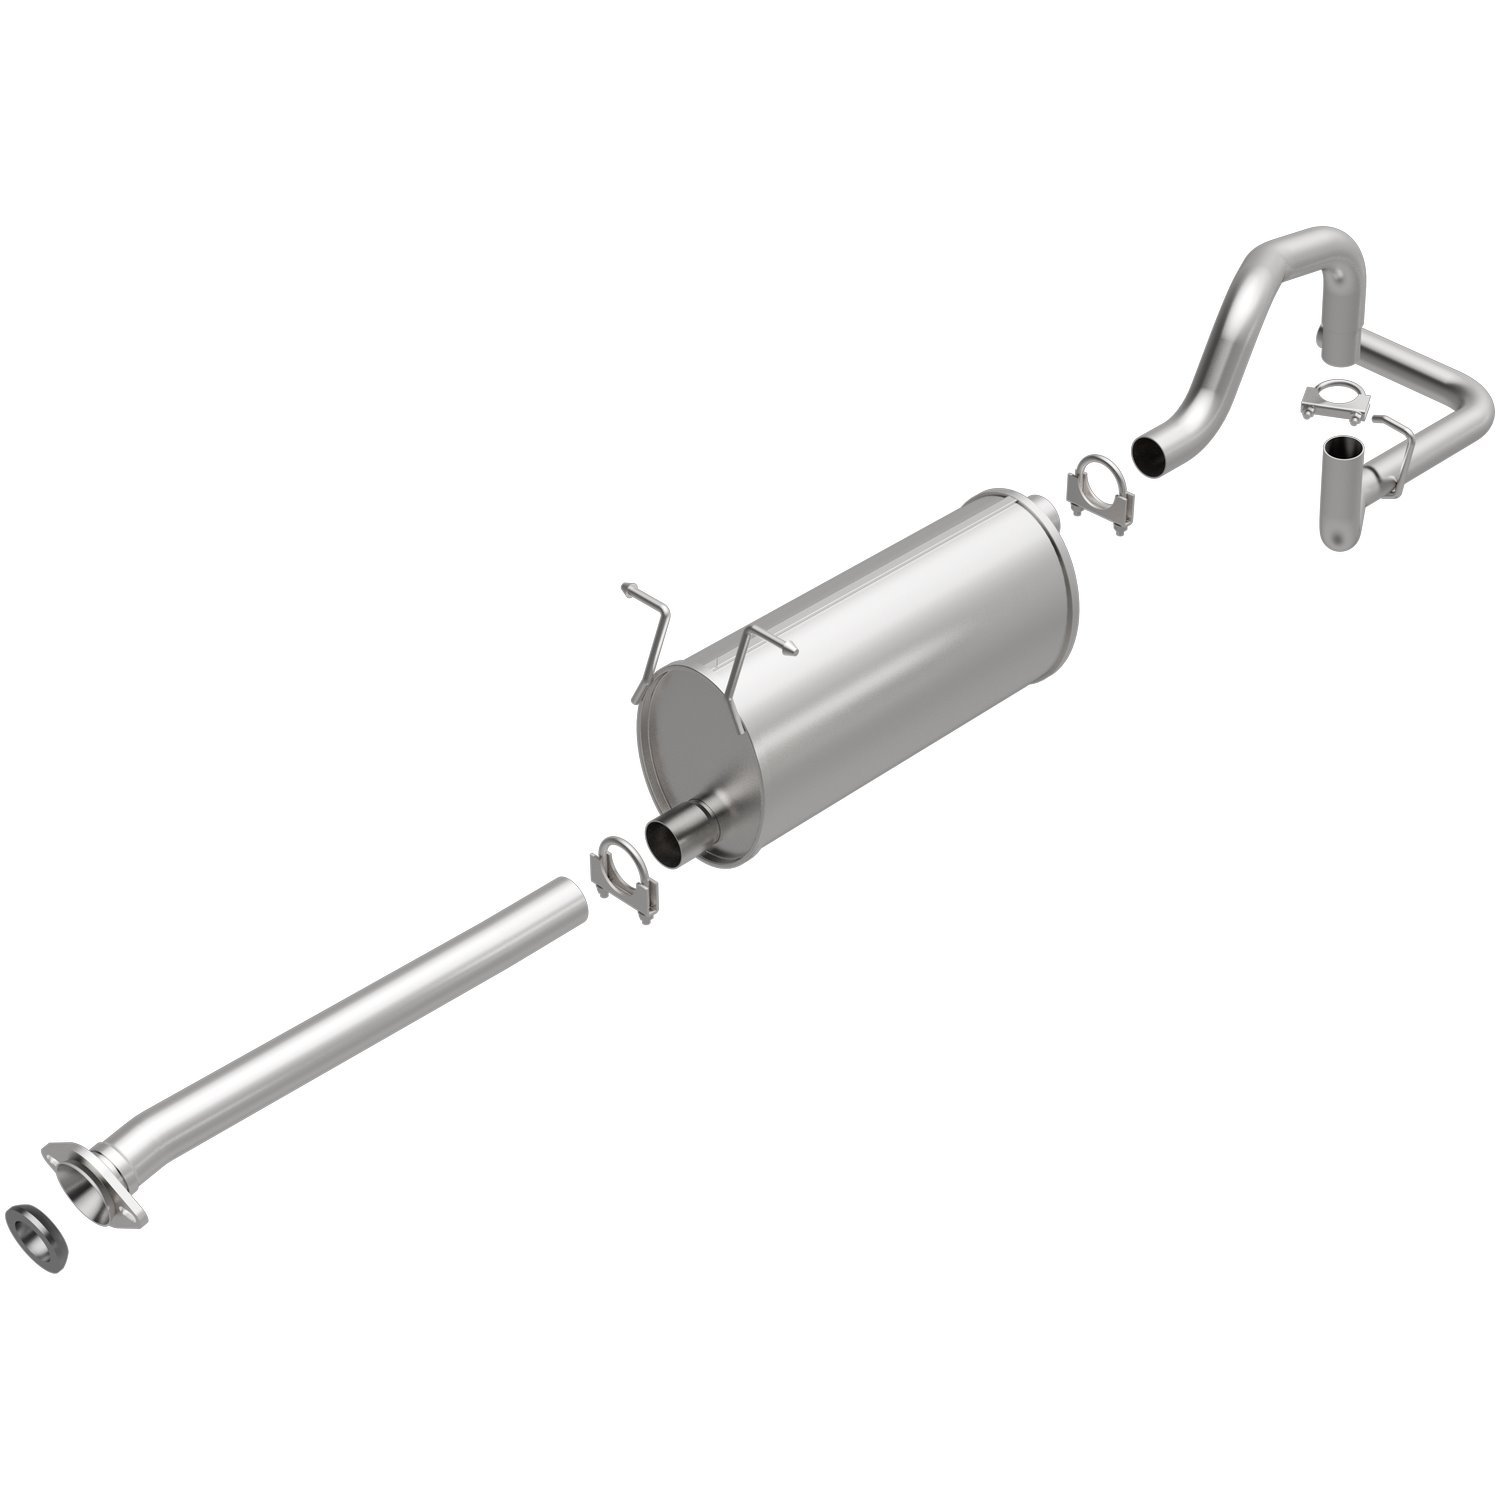 Direct-Fit Exhaust Kit, 2004-2011 Ford Ranger, Mazda B2300 2.3L